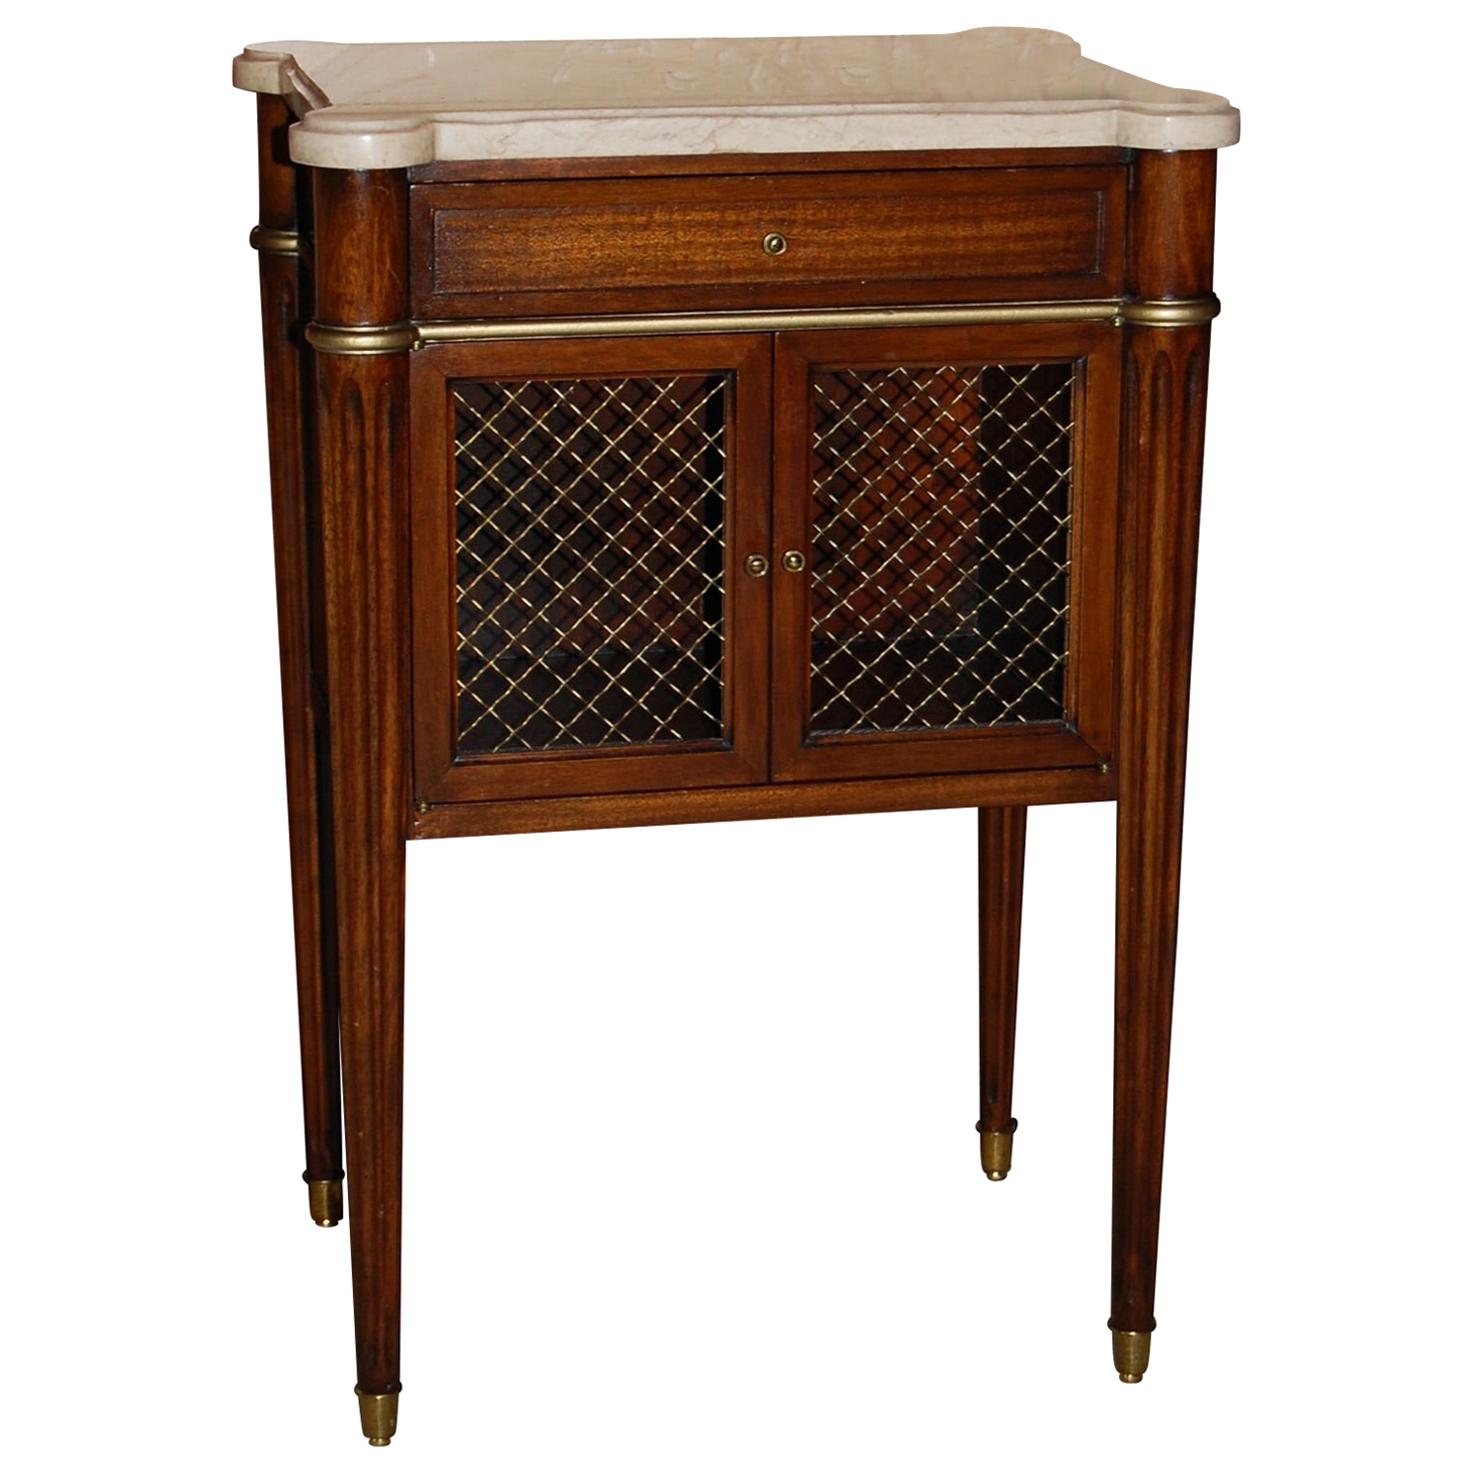 Mahogany Midcentury Marble-Top Night Table in Louis XVI Style by Maslow Freen